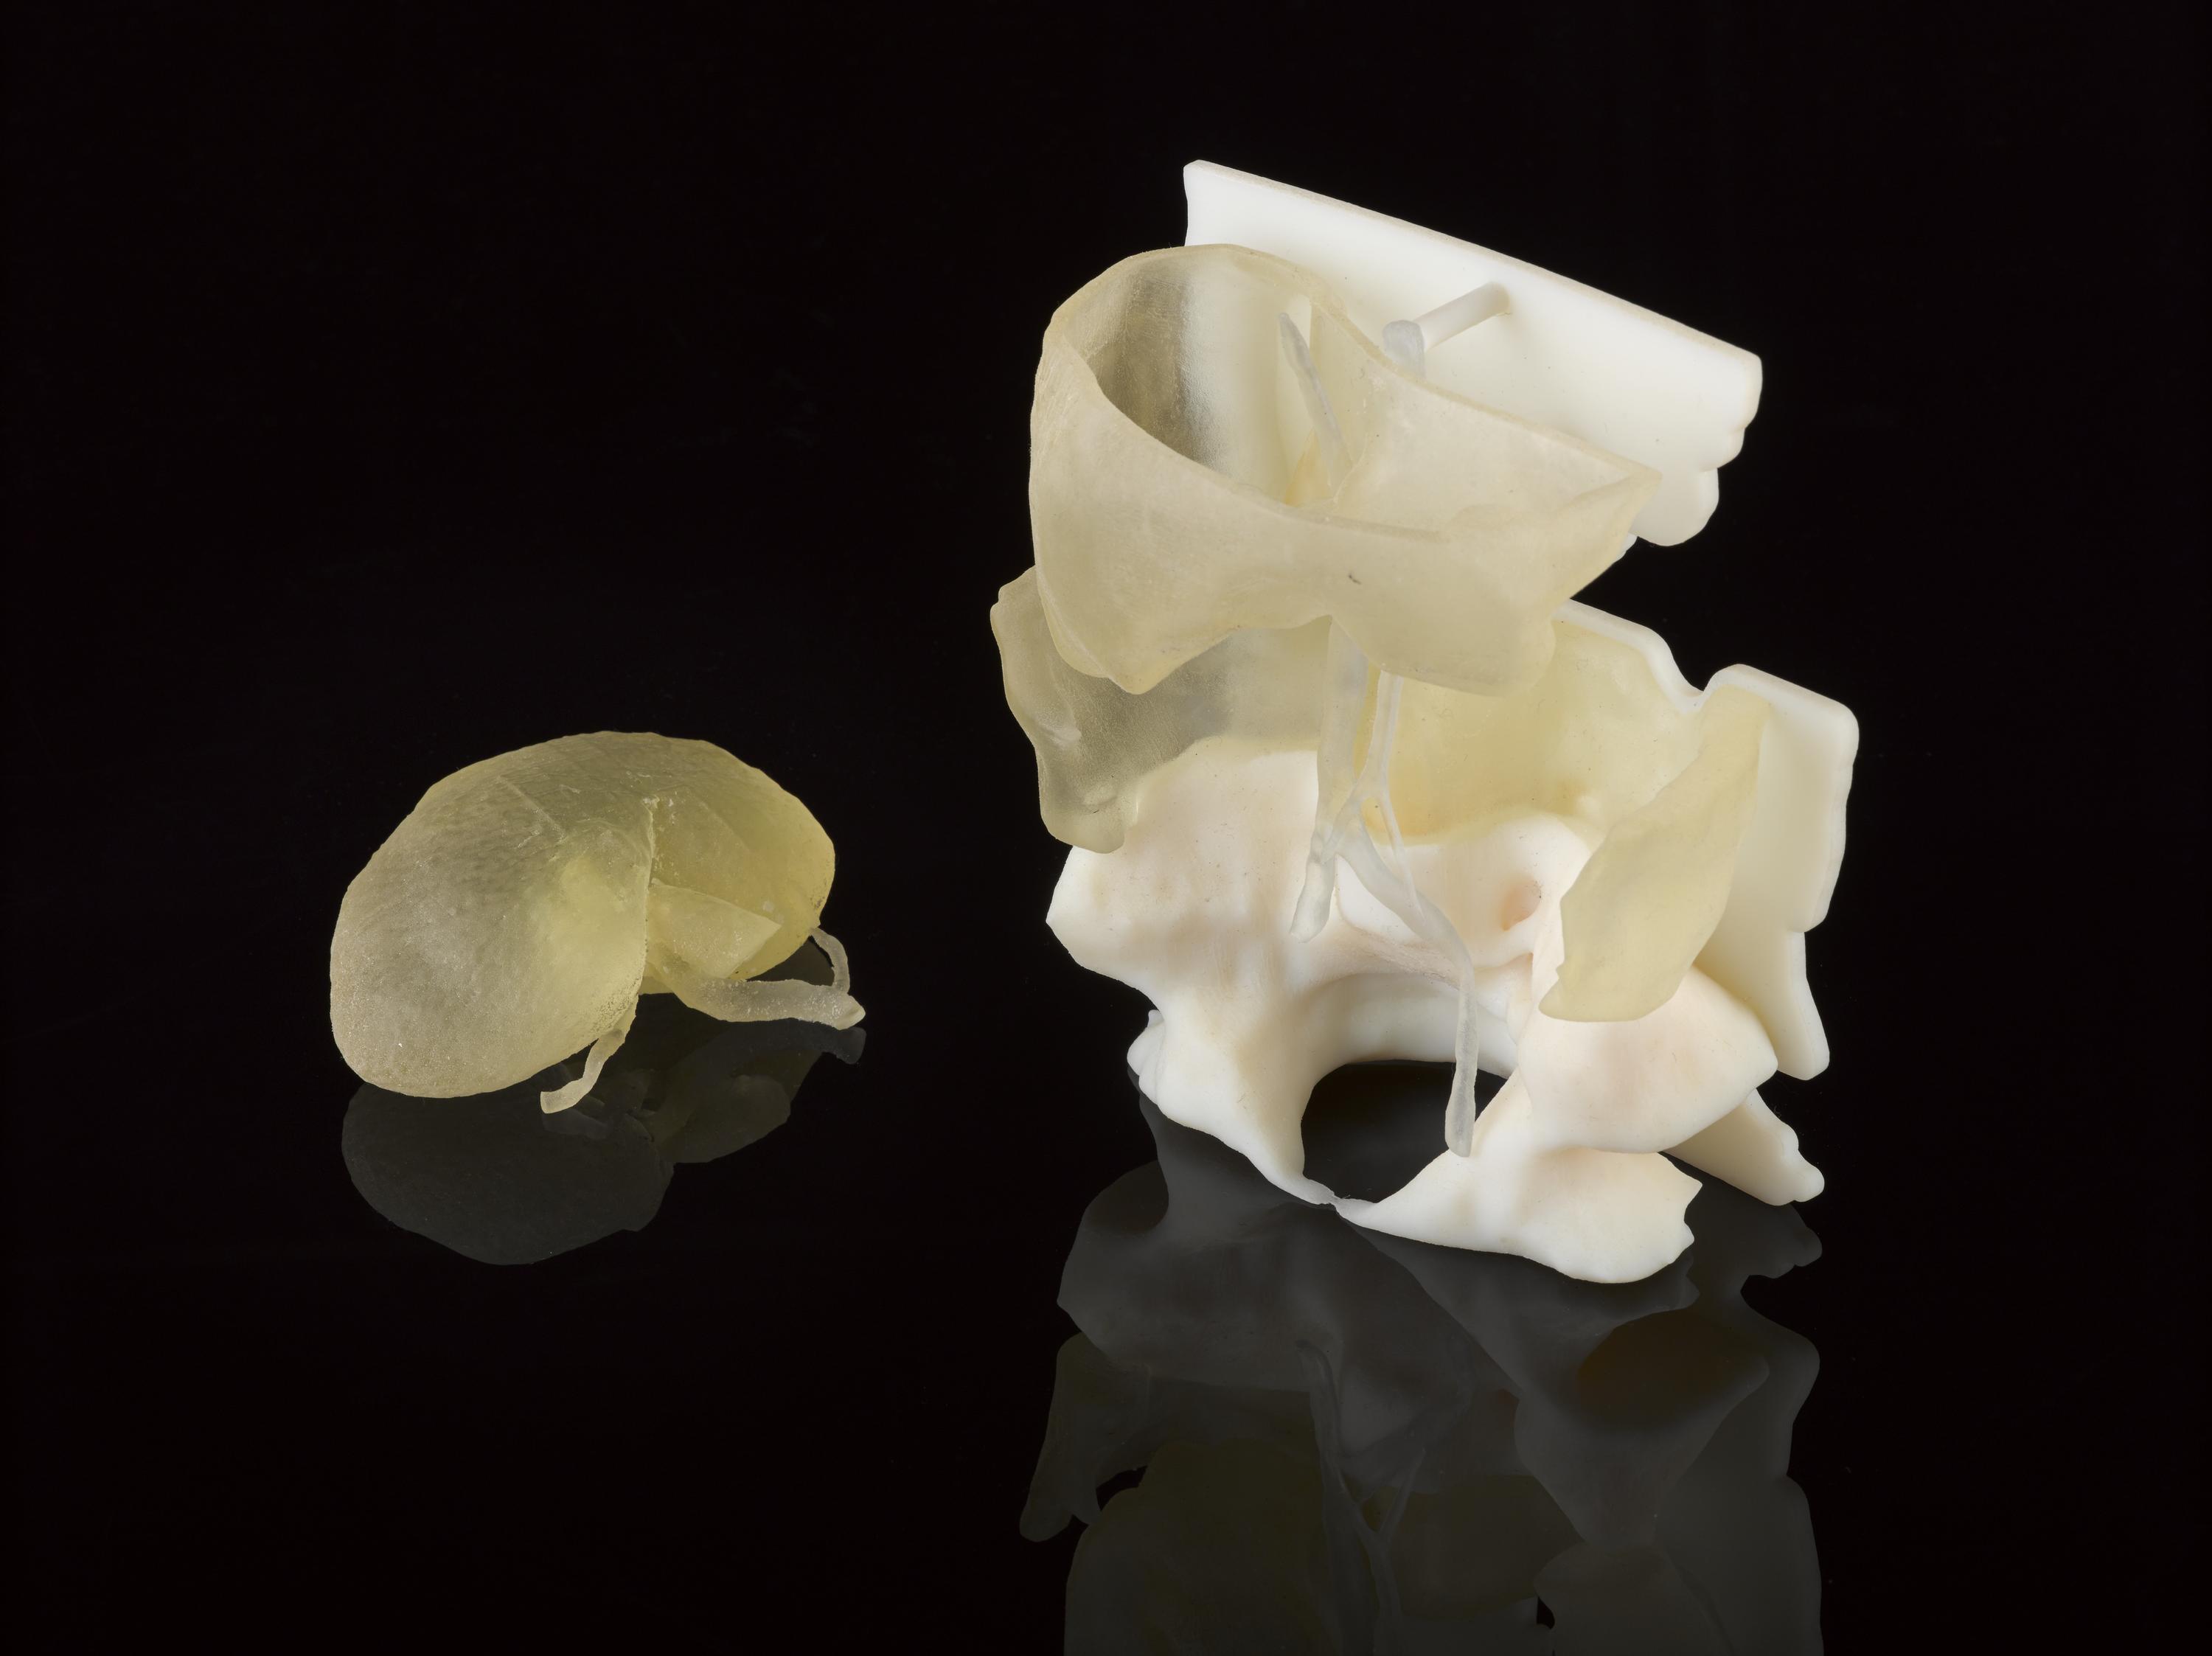 3D printed 1:1 models of a right adult kidney and child’s abdomen, 2015